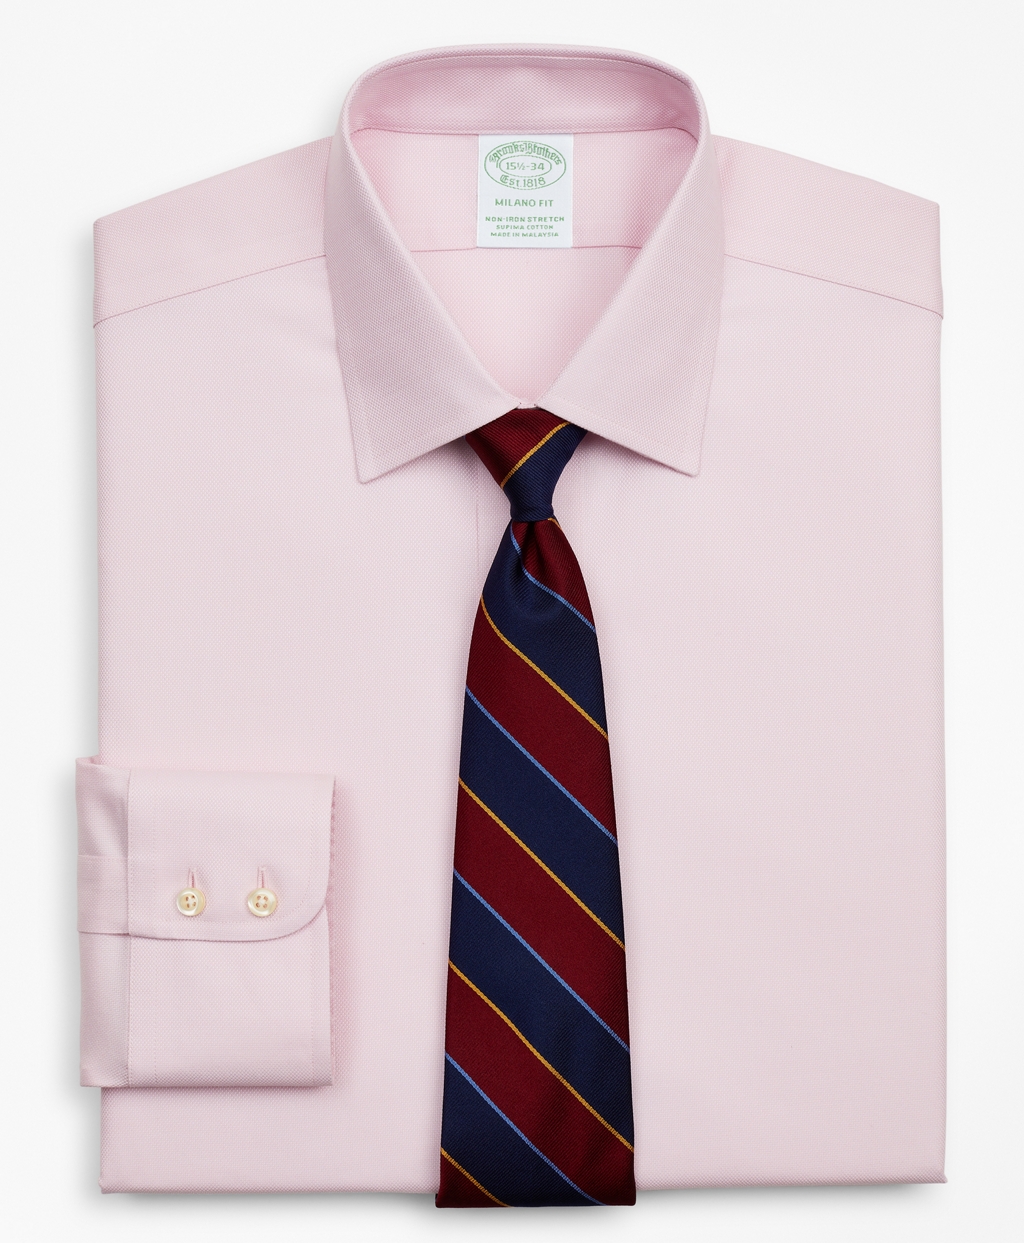 Brooksbrothers Stretch Milano Slim-Fit Dress Shirt, Non-Iron Royal Oxford Ainsley Collar